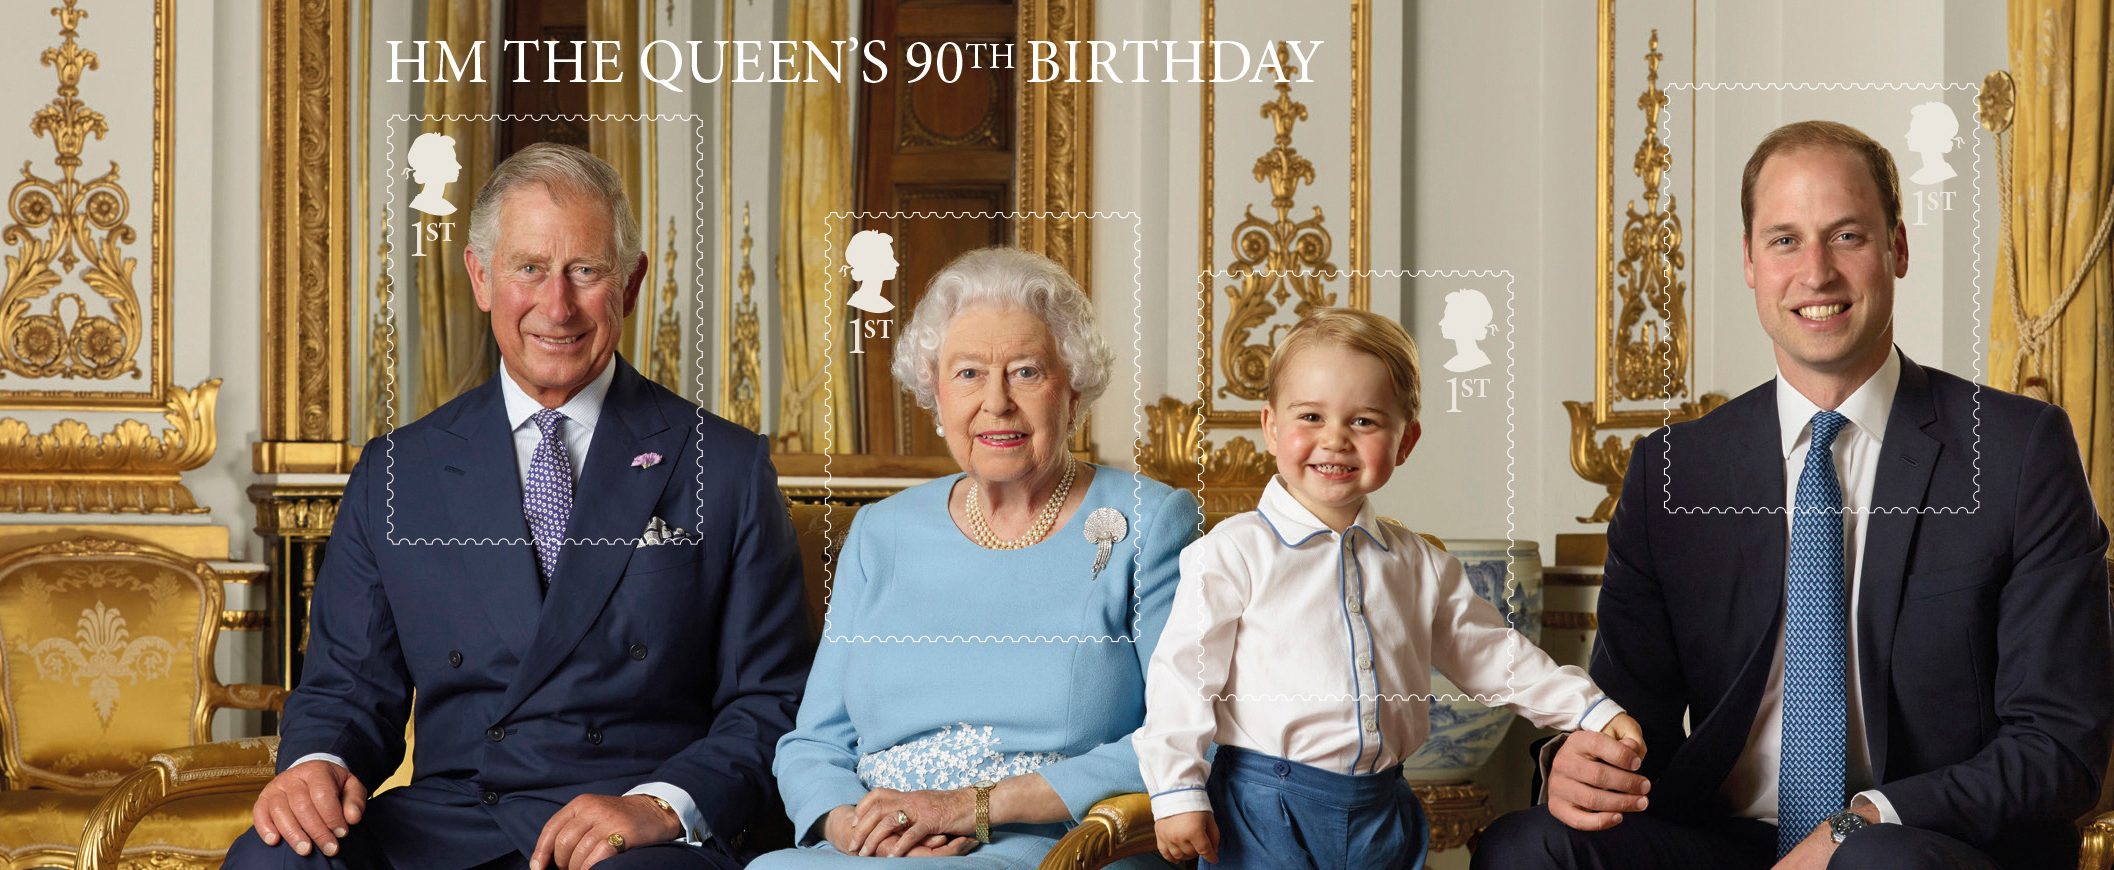 COMMEMORATIVE STAMPS. A stamp sheet issued by the Royal Mail to mark the 90th birthday of Queen Elizabeth II featuring four generations of the Royal family. The picture was taken in the summer of 2015 in the White Drawing Room at Buckingham Palace, London, United Kingdom The Queen celebrates her 90th birthday on April 21, Thursday. Photo by Ranald Mackechnie/Royal Mail/EPA 